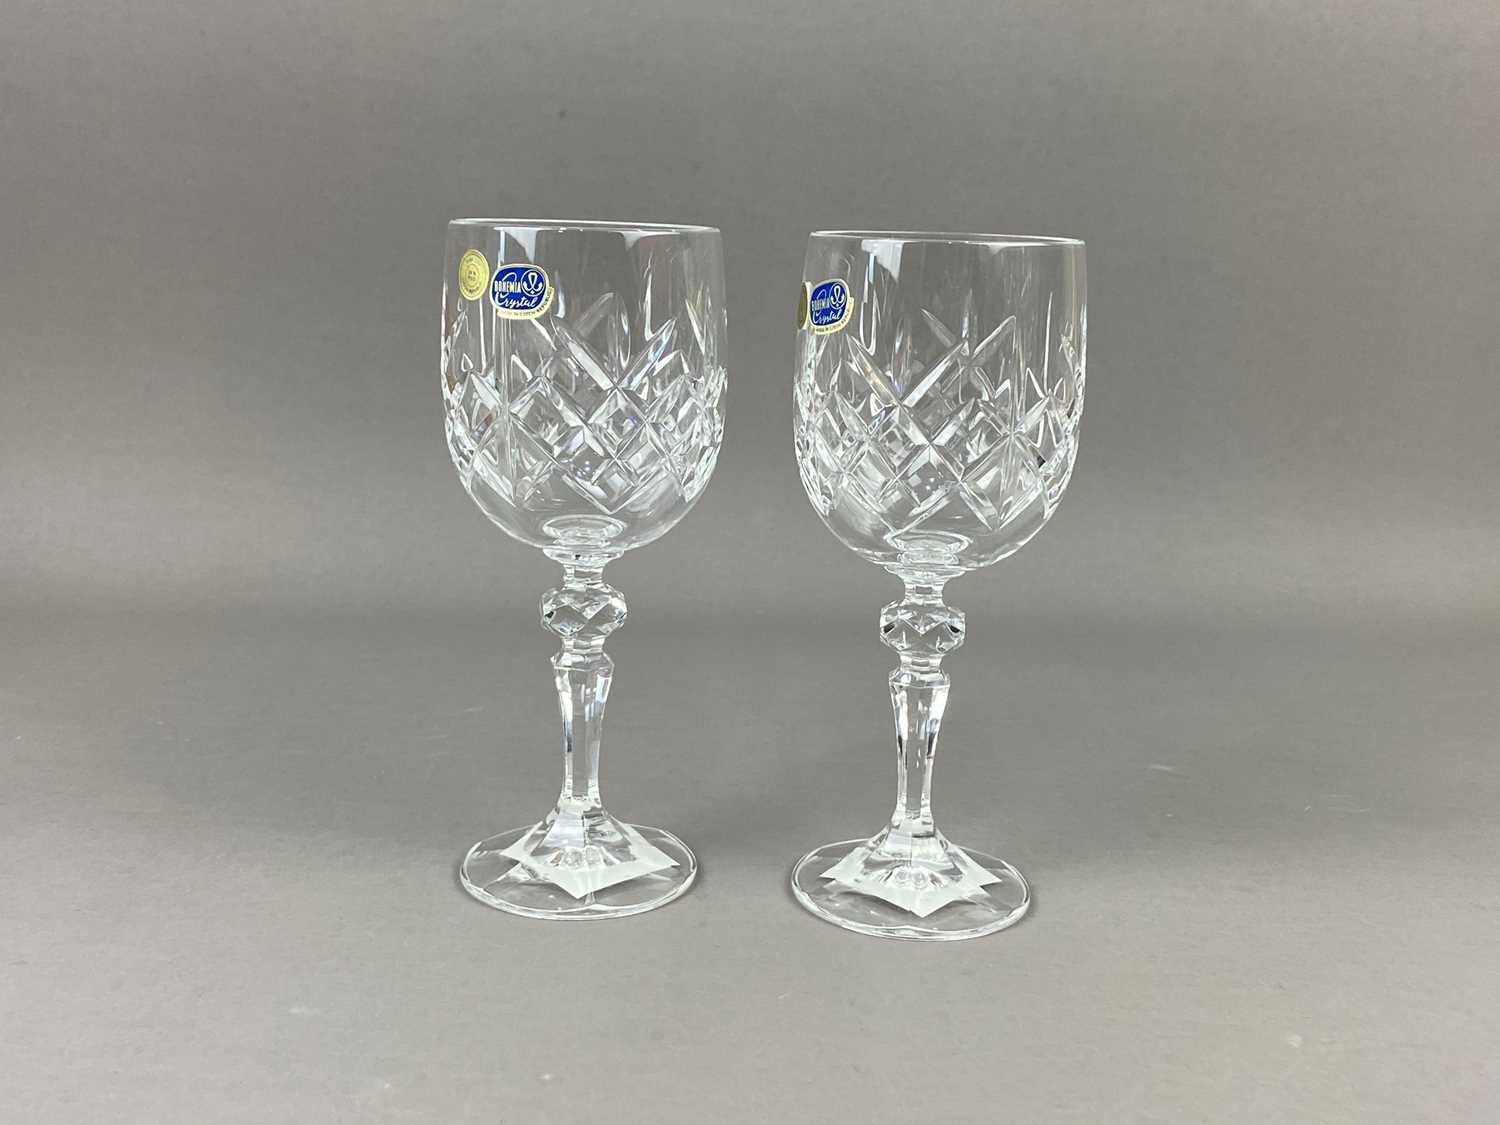 A SET OF SIX BOHEMIA CRYSTAL GLASSES, A CRYSTAL BOWL AND A HORS D'OEUVRES DISH - Image 2 of 2